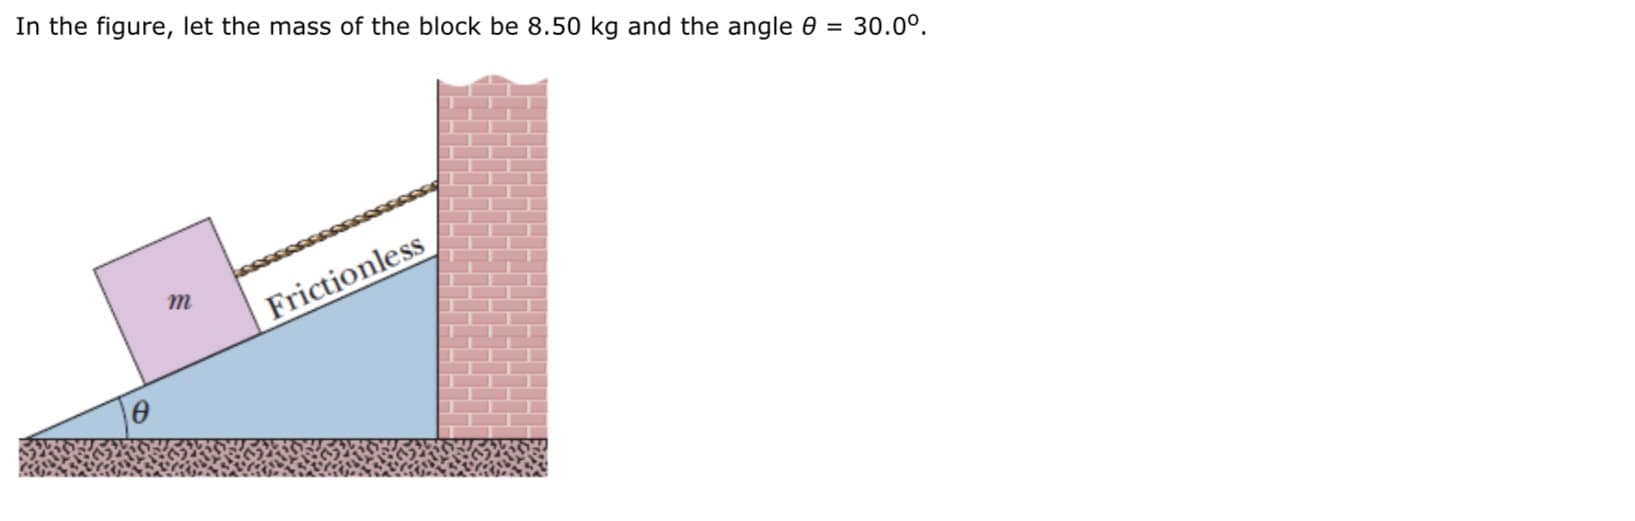 In the figure, let the mass of the block be 8.50 kg and the angle 0 = 30.0°.
Frictionless
